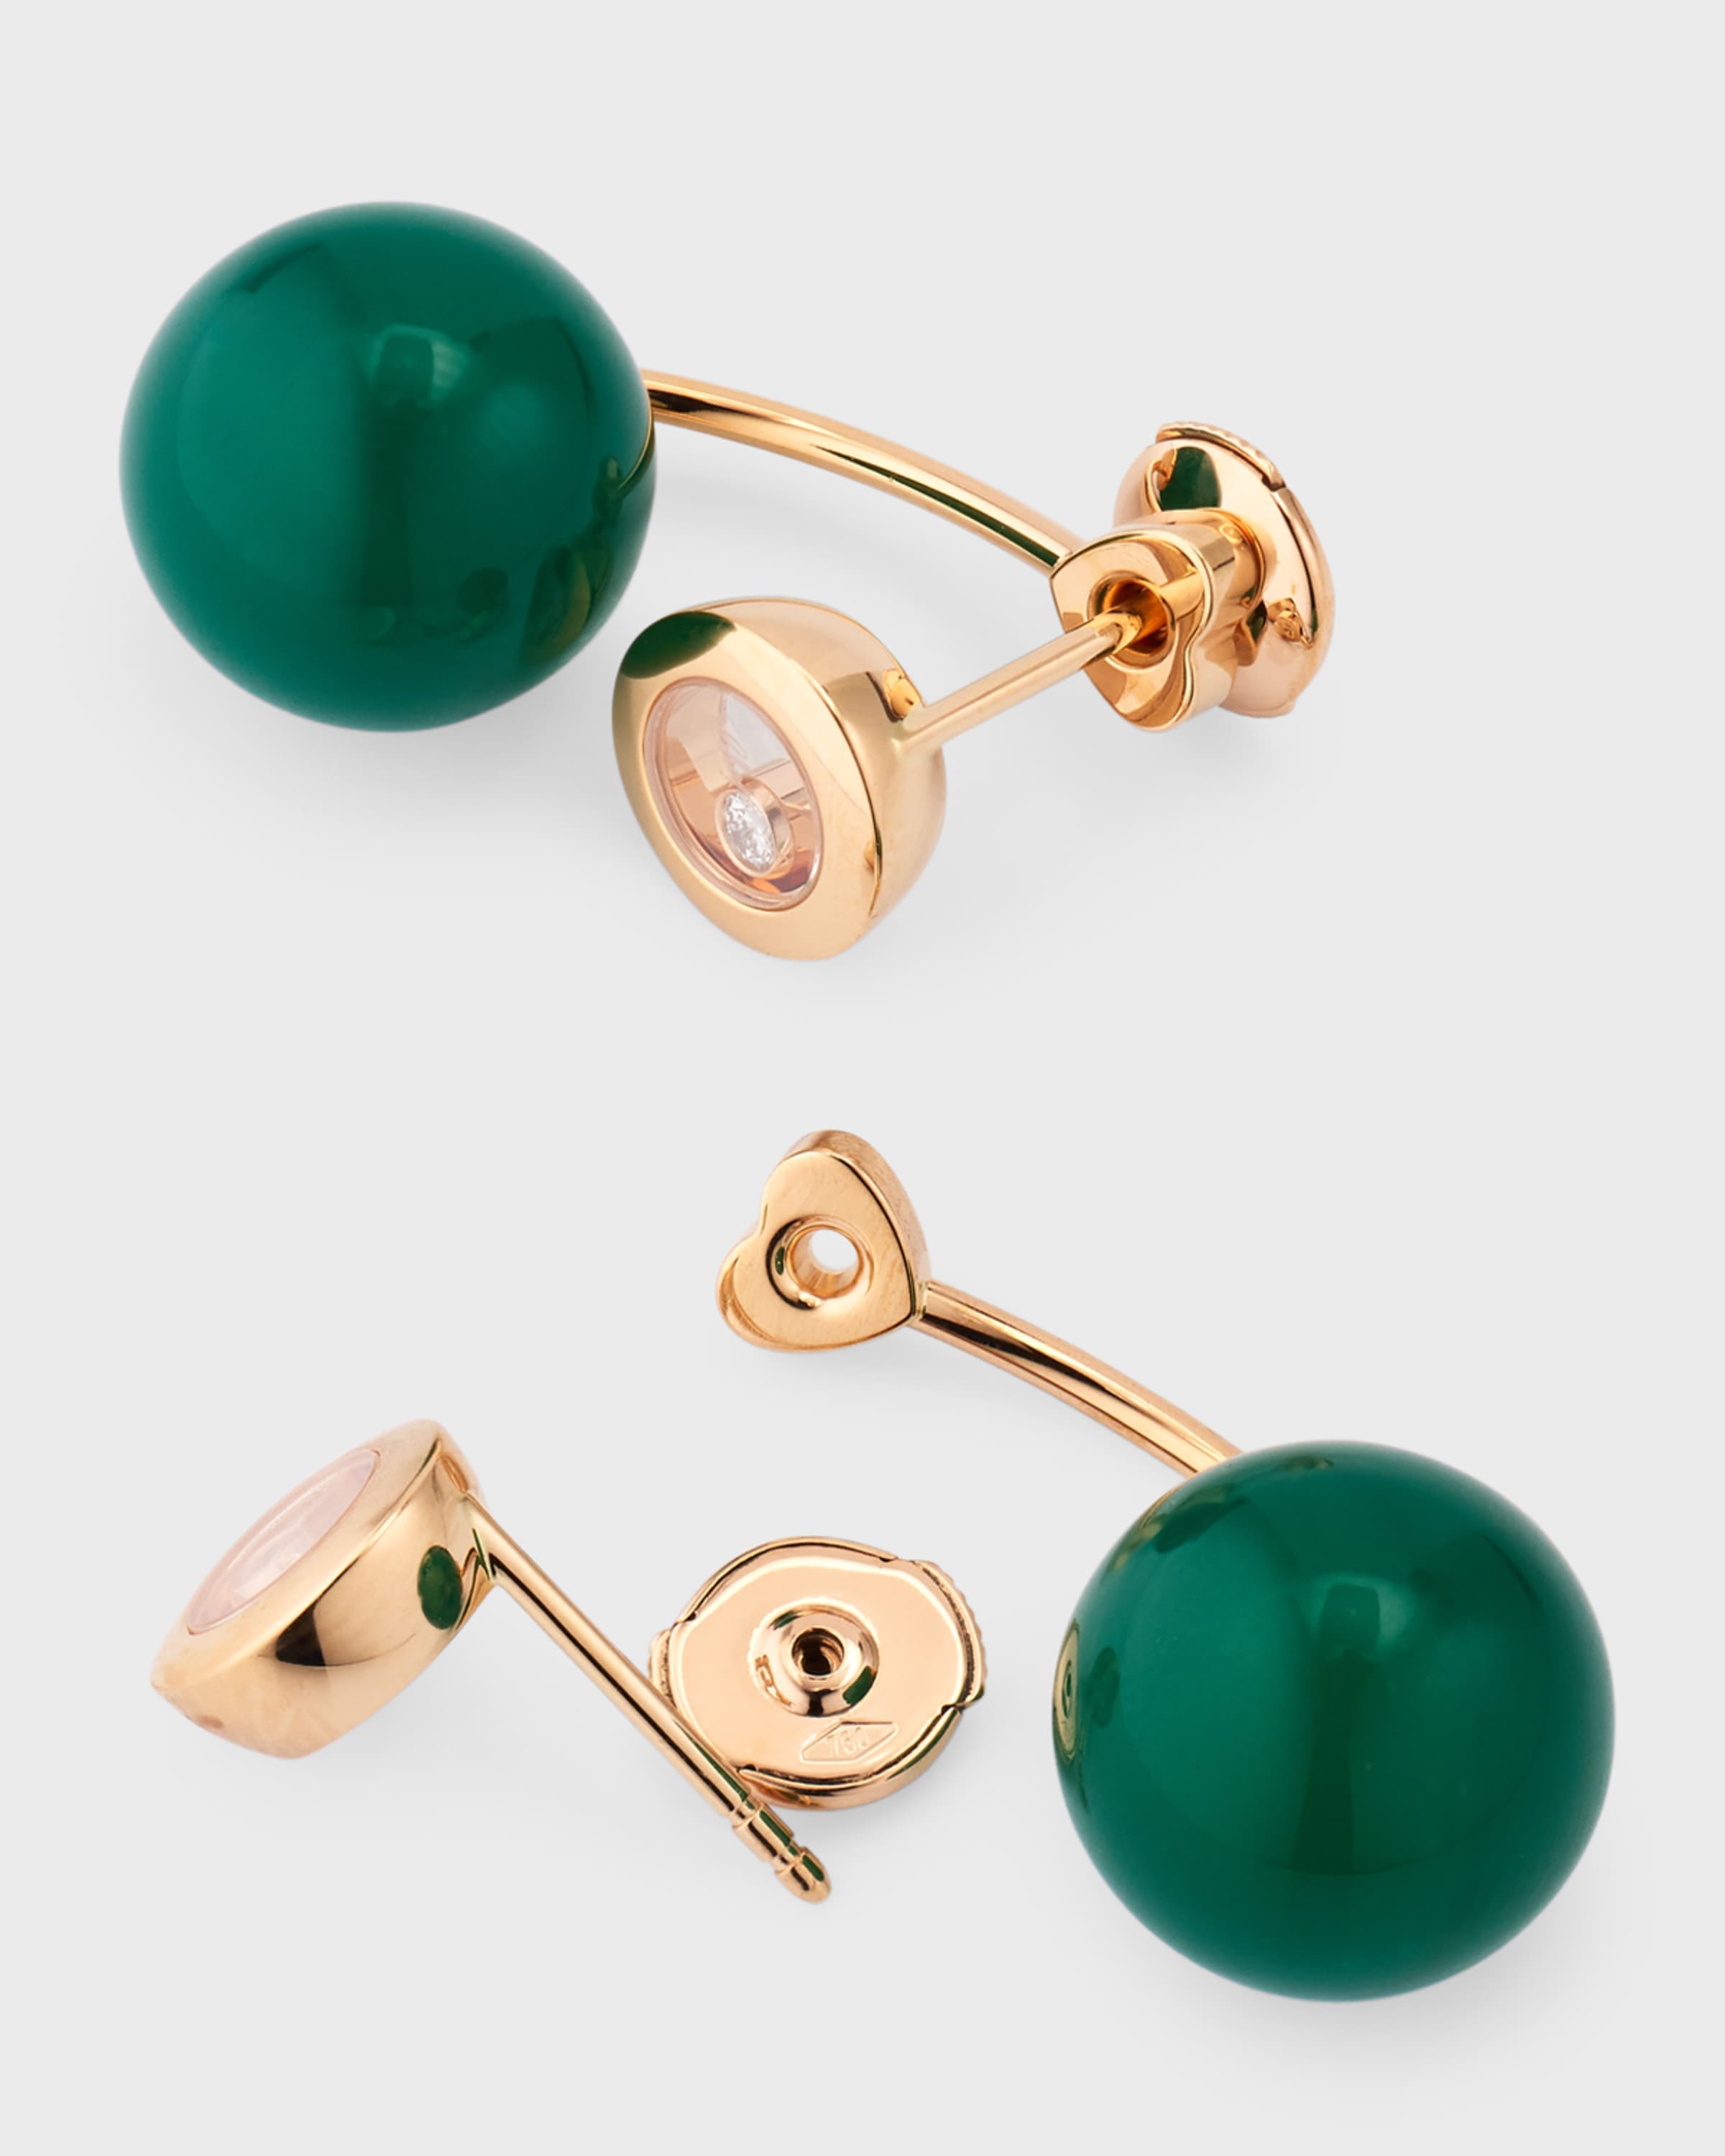 Happy Diamonds Planet 18K Rose Gold and Green Agate Earrings - 3